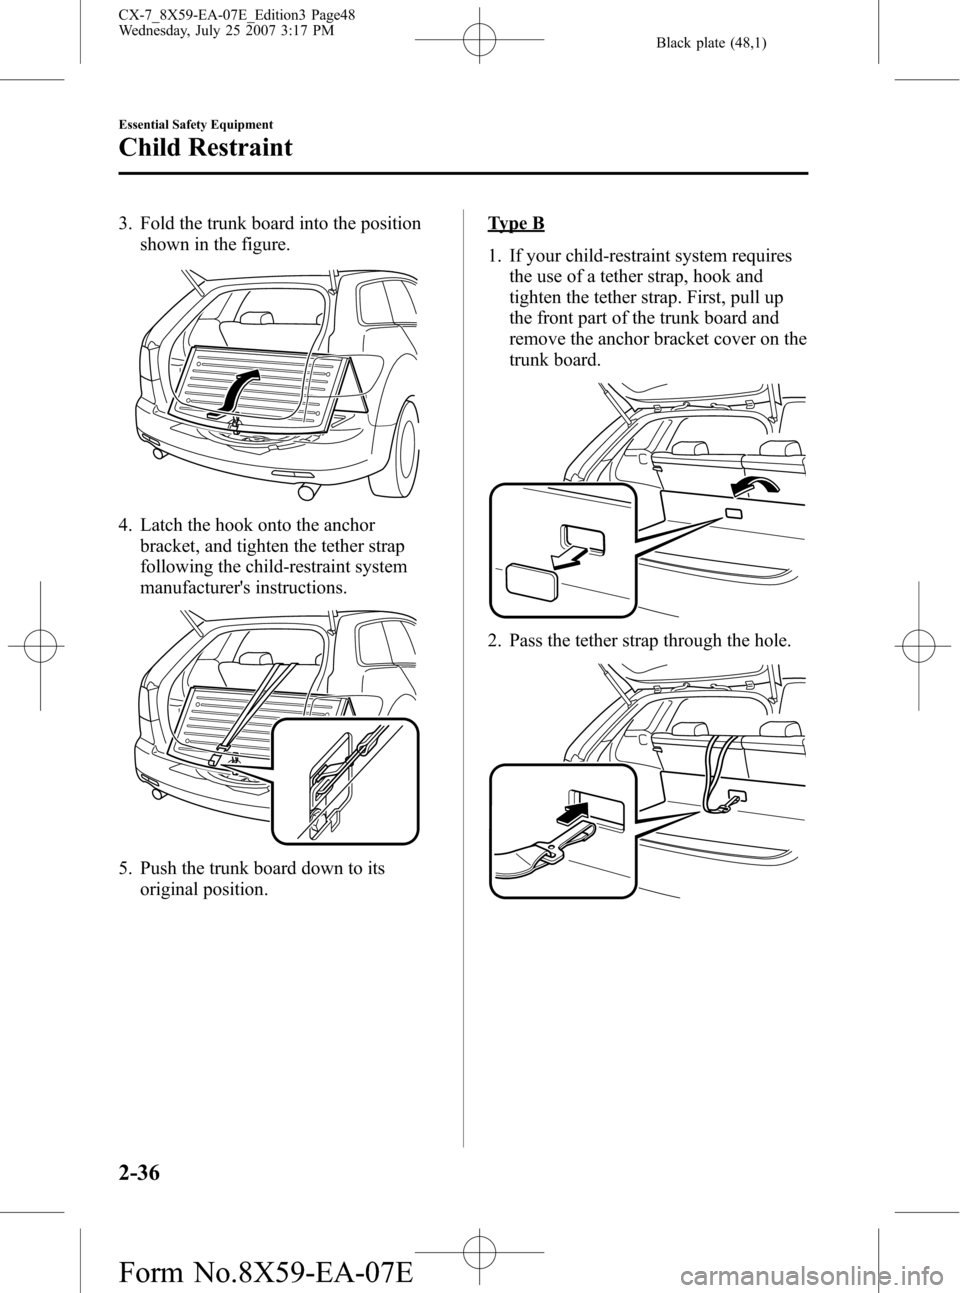 MAZDA MODEL CX-7 2008   (in English) Service Manual Black plate (48,1)
3. Fold the trunk board into the positionshown in the figure.
4. Latch the hook onto the anchor
bracket, and tighten the tether strap
following the child-restraint system
manufactur